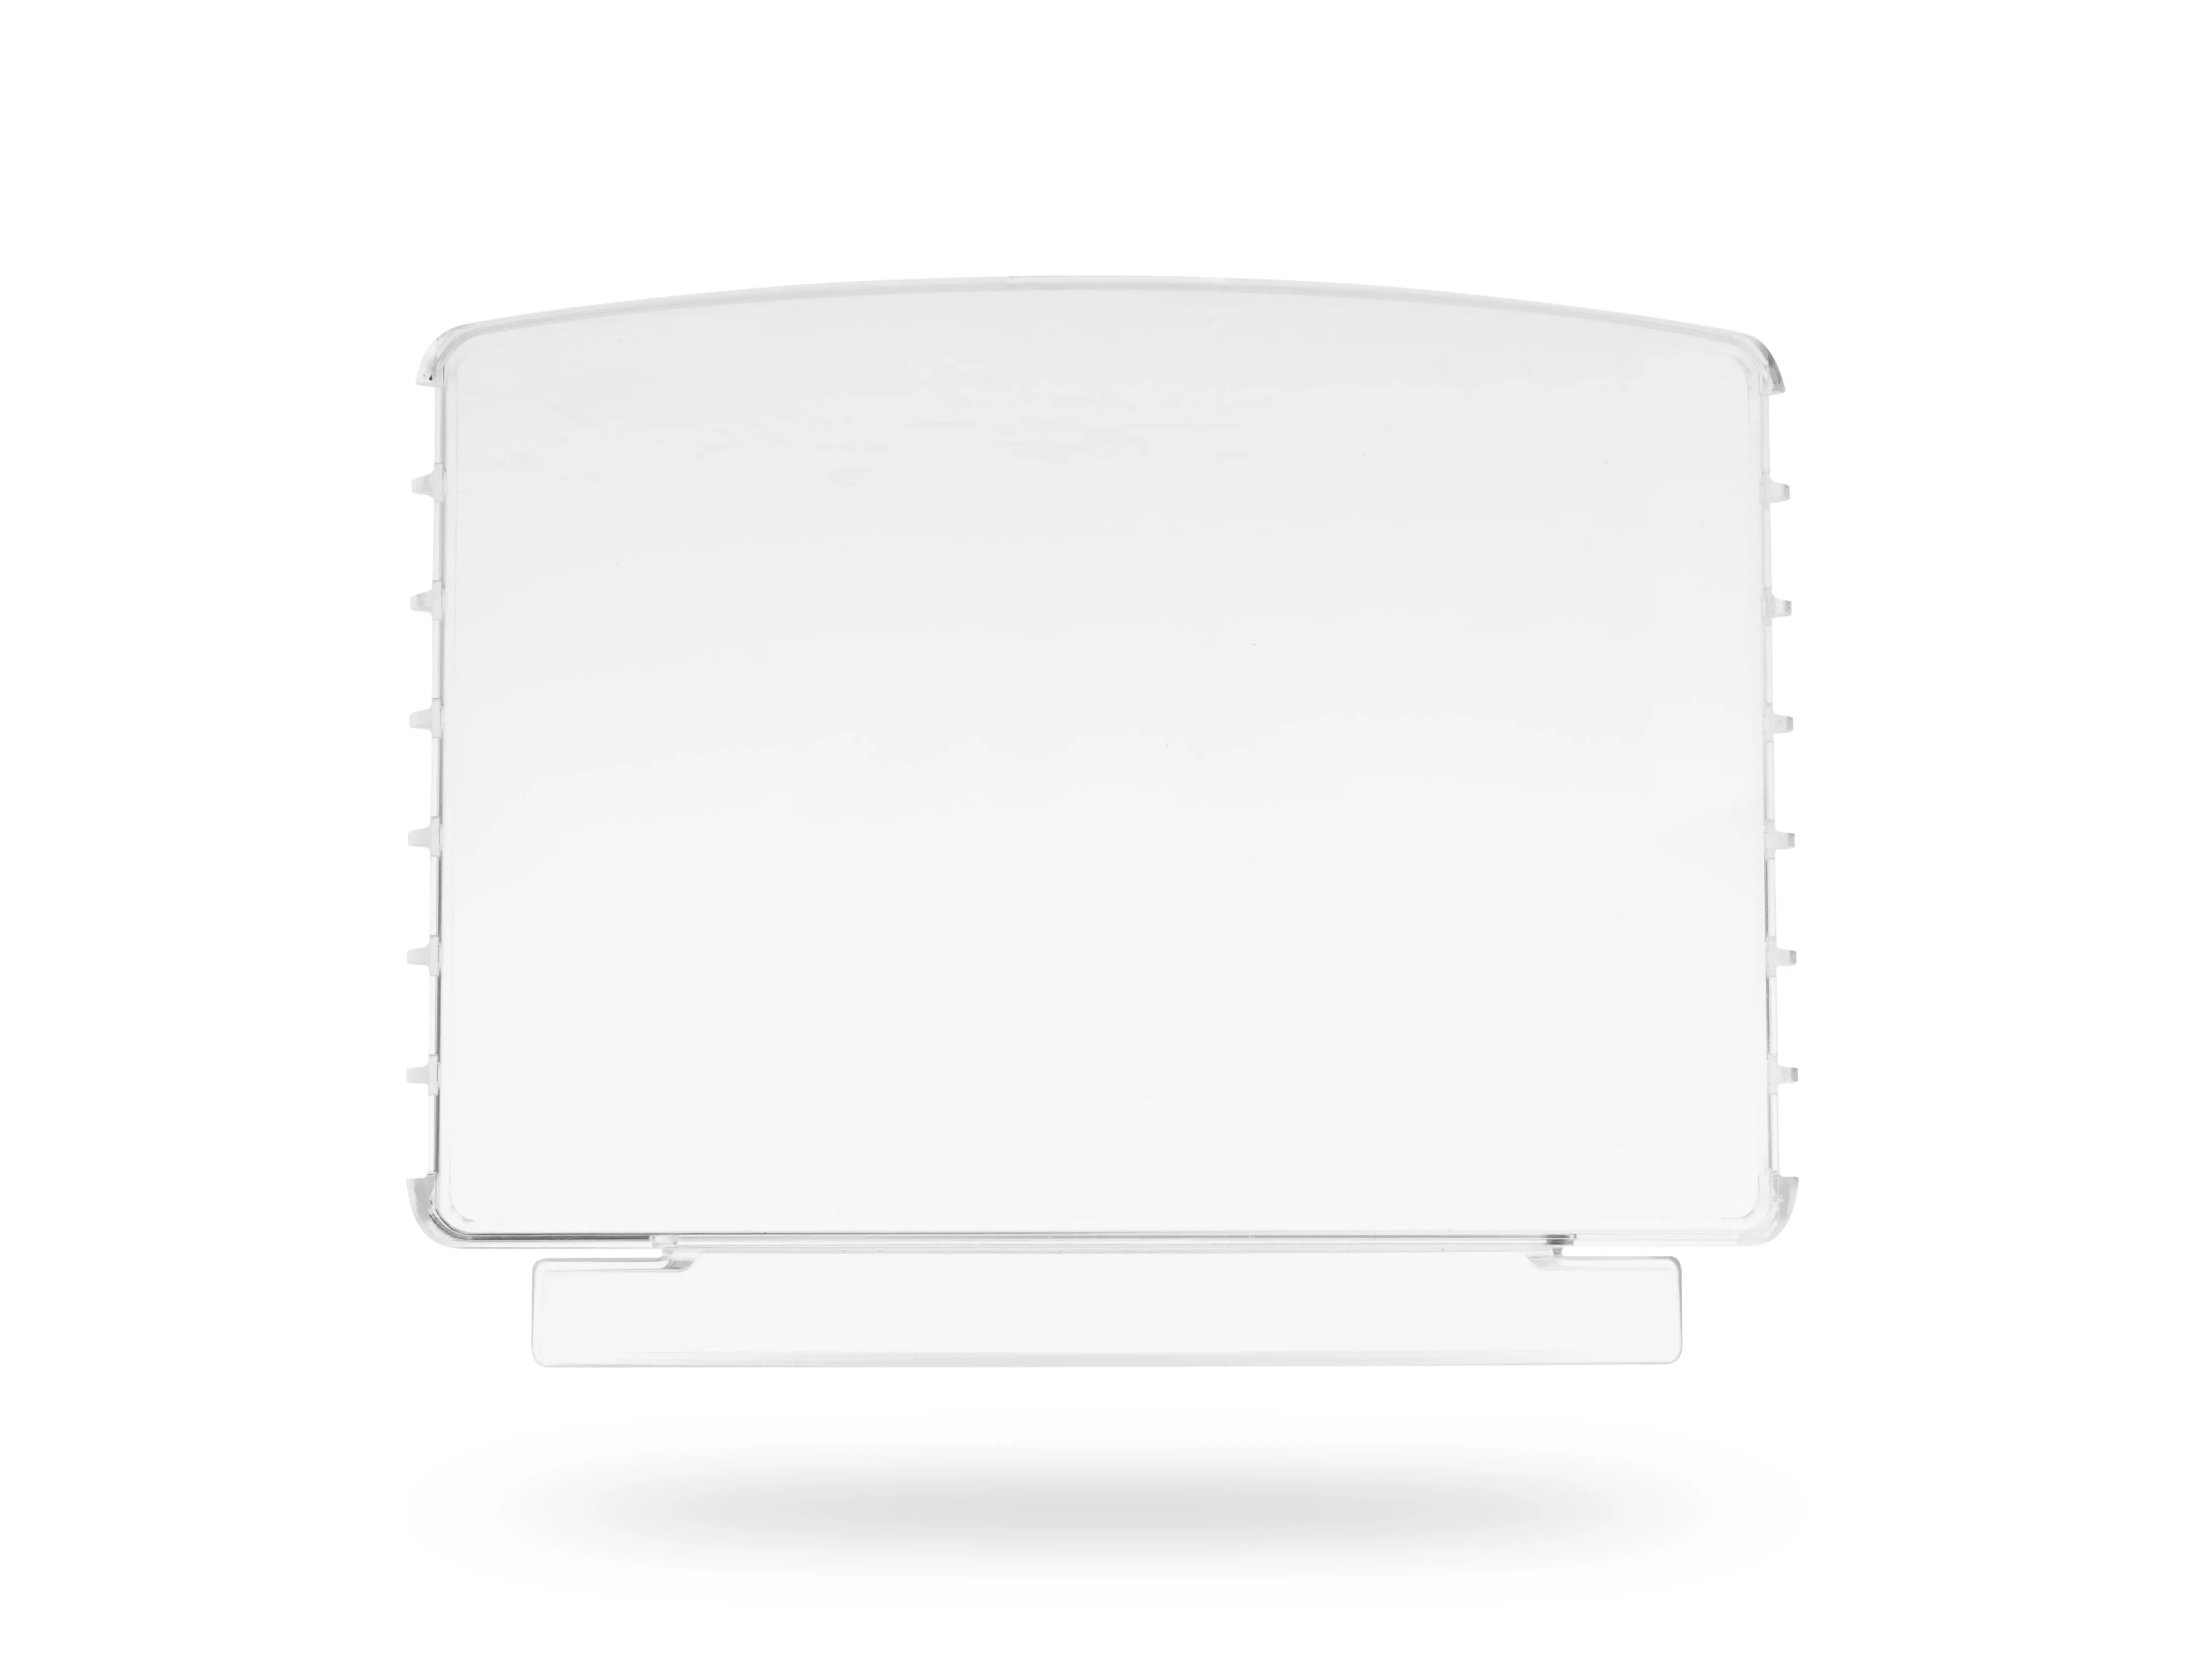 Product Number 08-0200-50 | 3M™ Speedglas™ G5-02 Inside Protection Plate with Integrated Airflow Deflector 08-0200-50